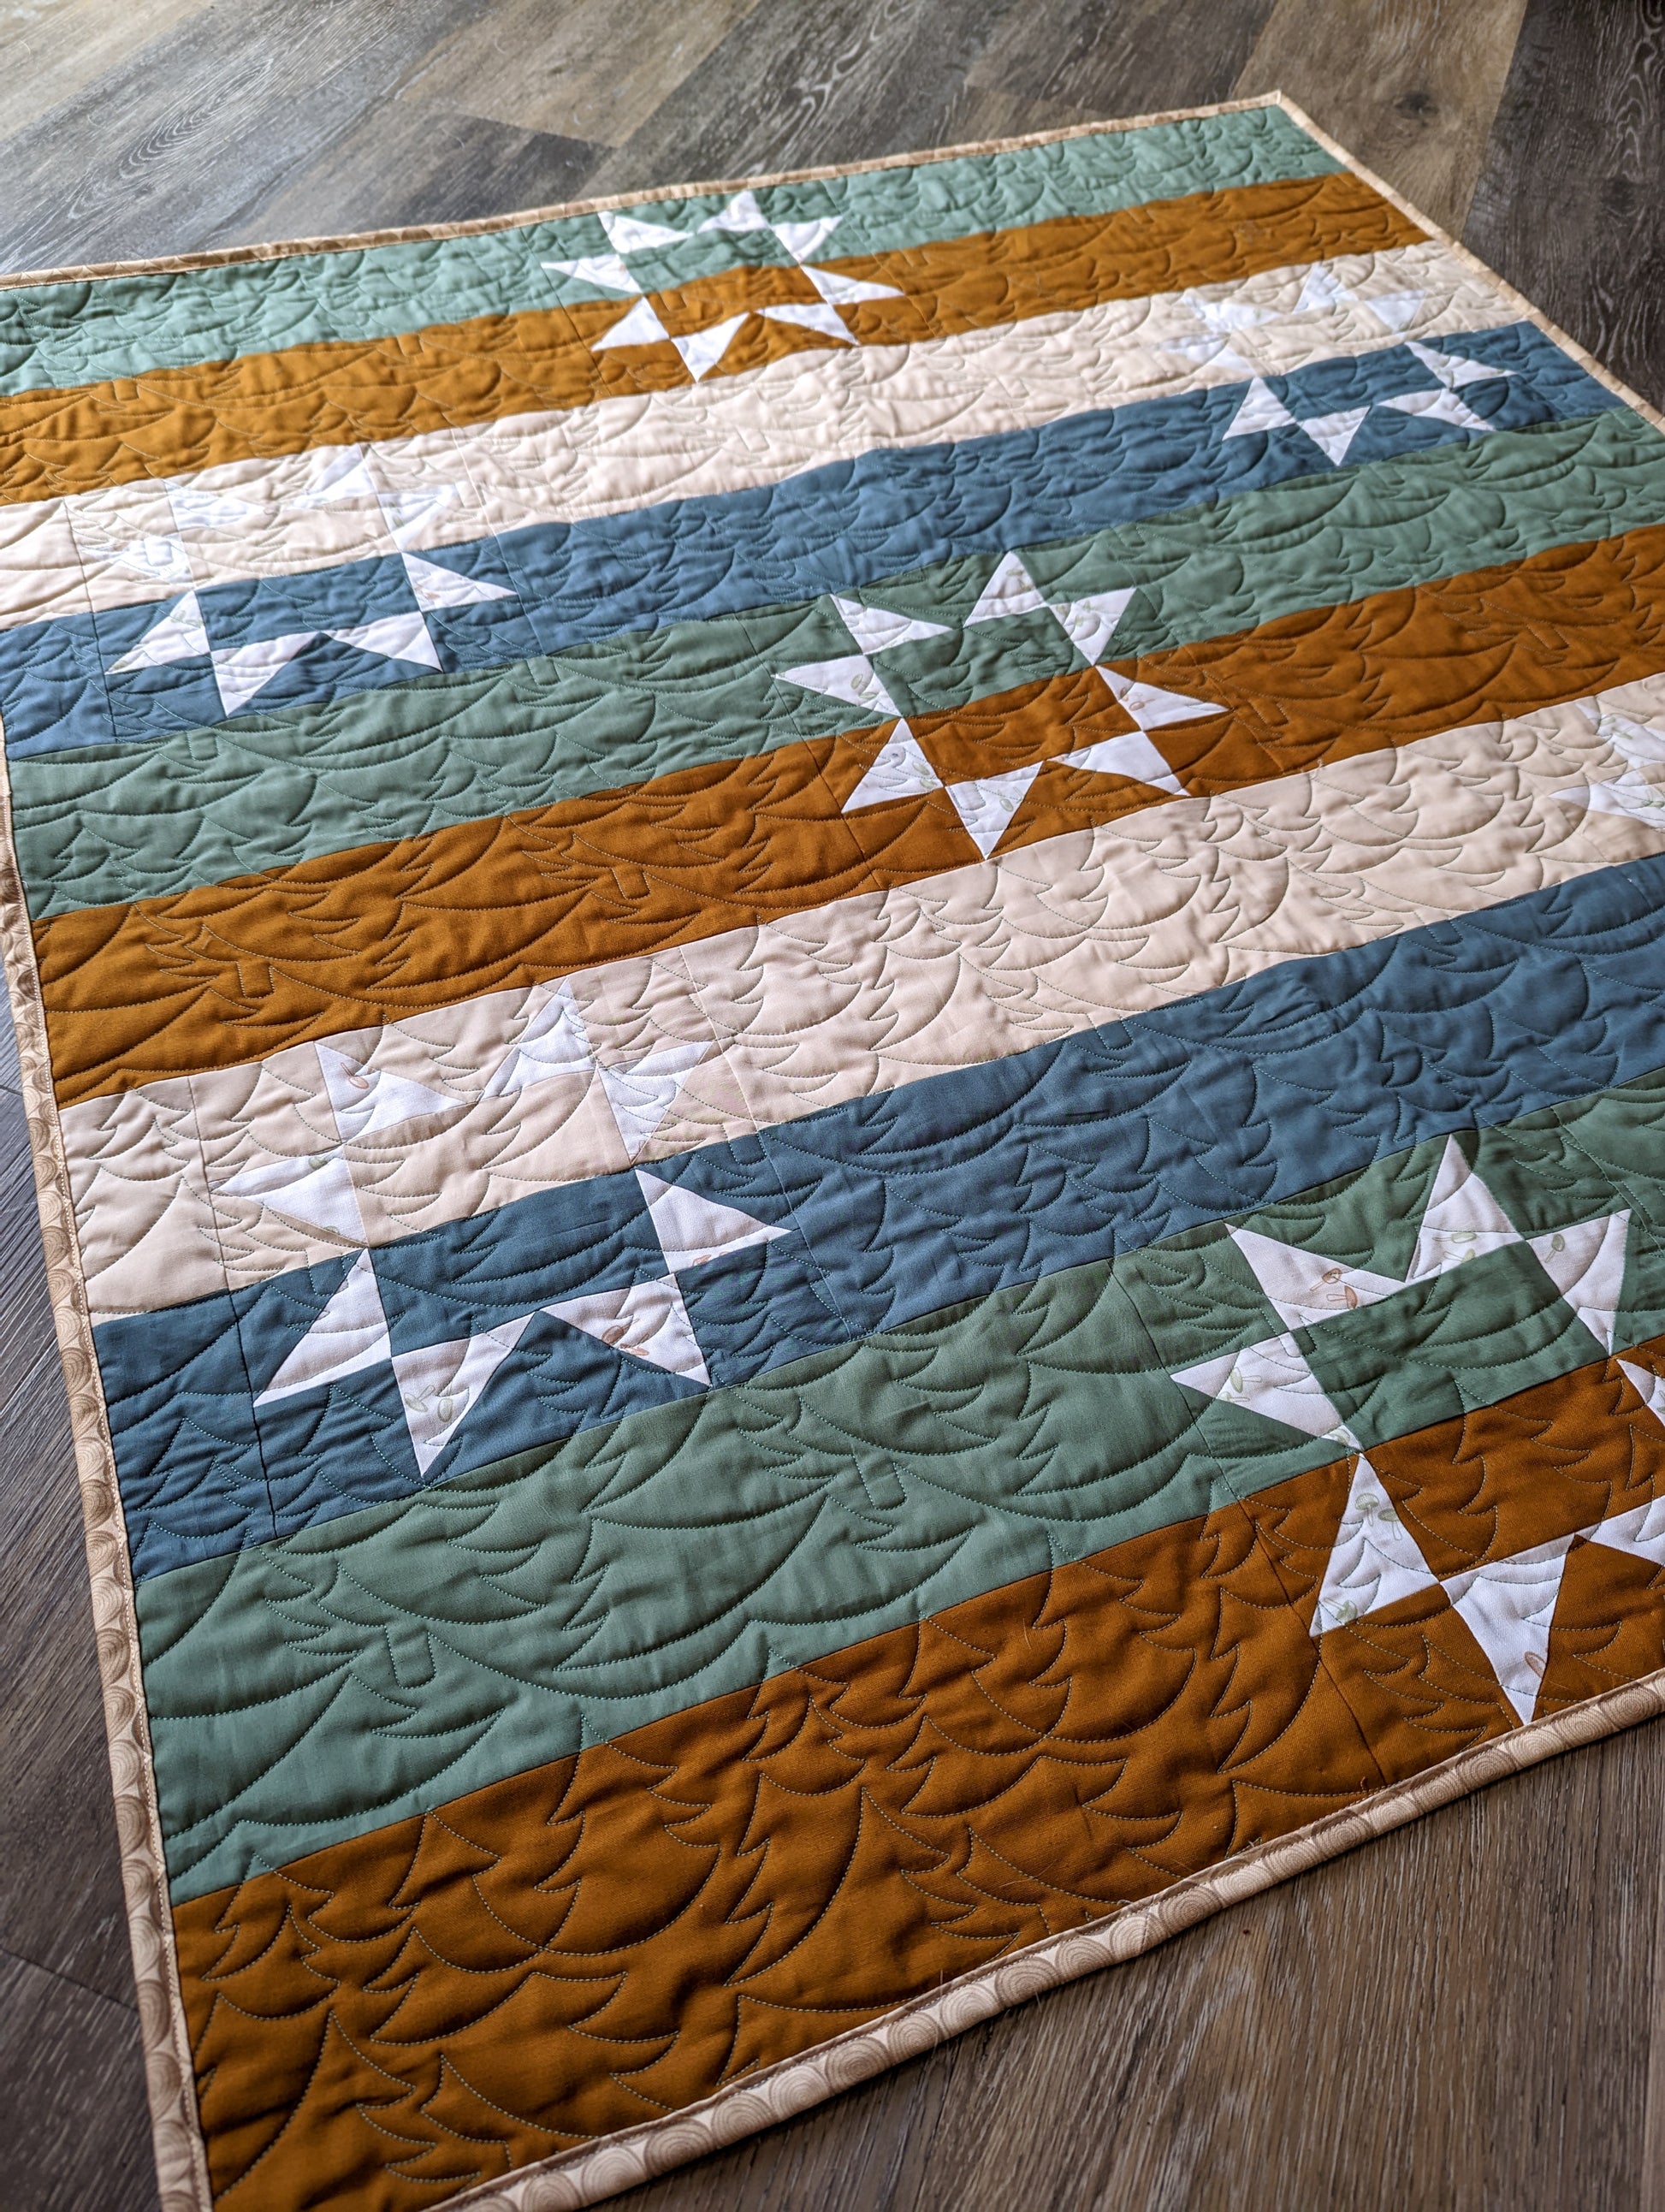 Blue Moon Star Quilt Using Electric Quilt 8